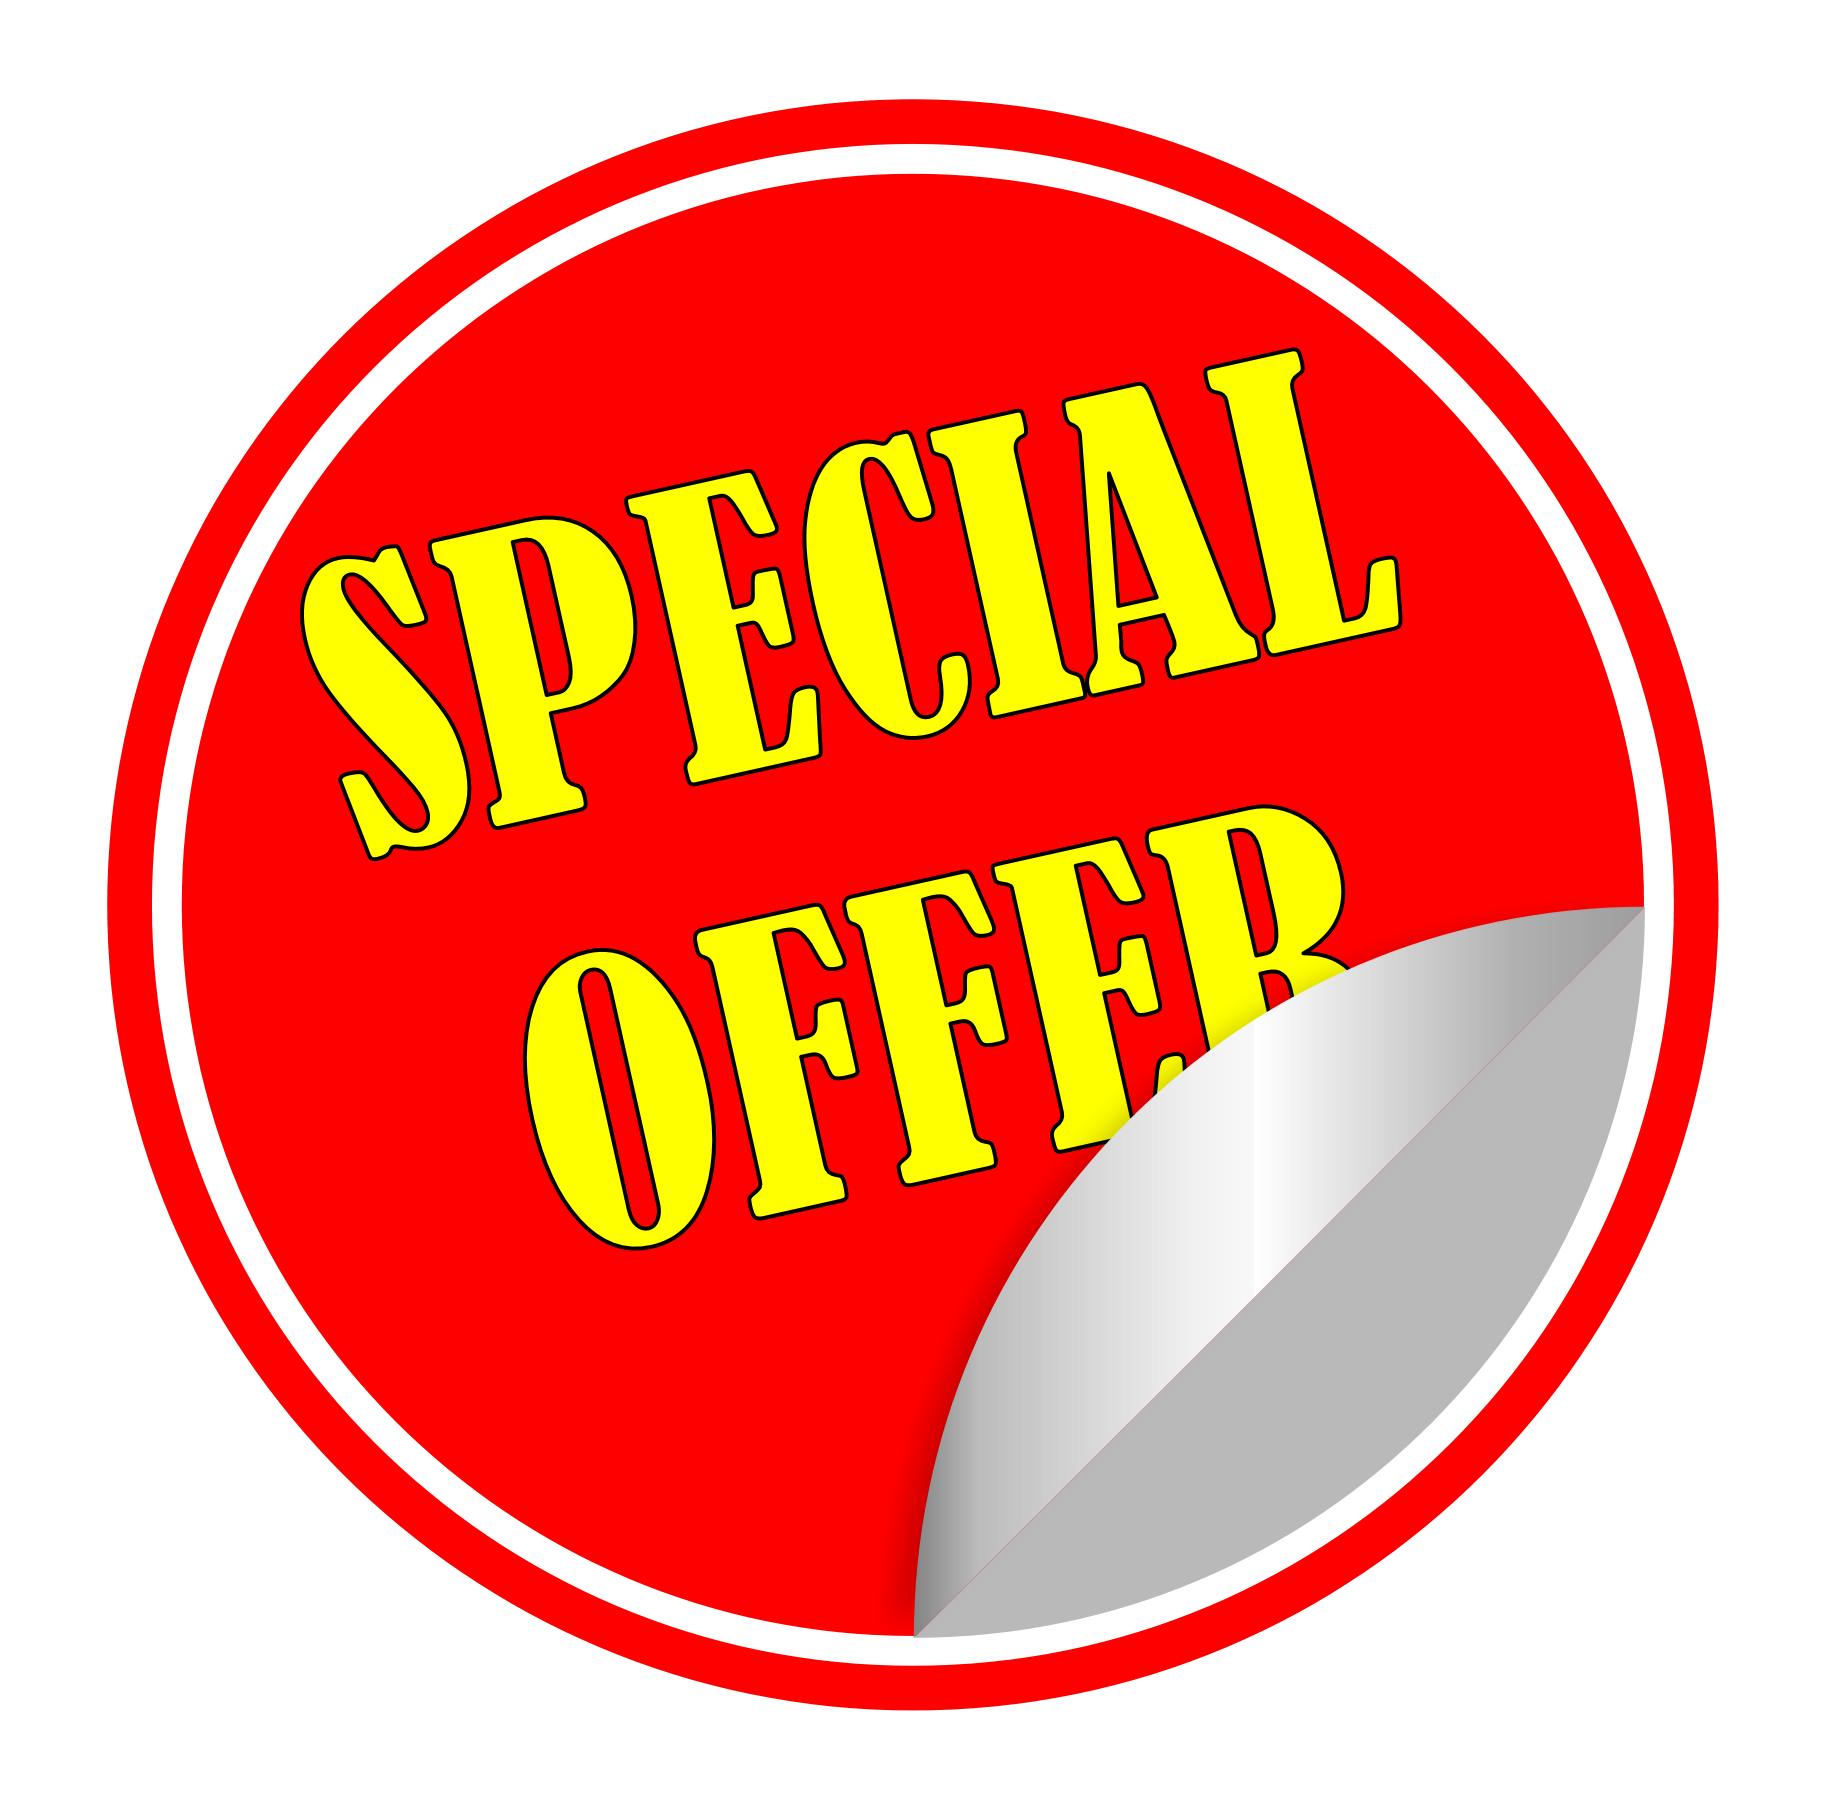 Special Offer Png Transparent Image - Special Offer, Transparent background PNG HD thumbnail